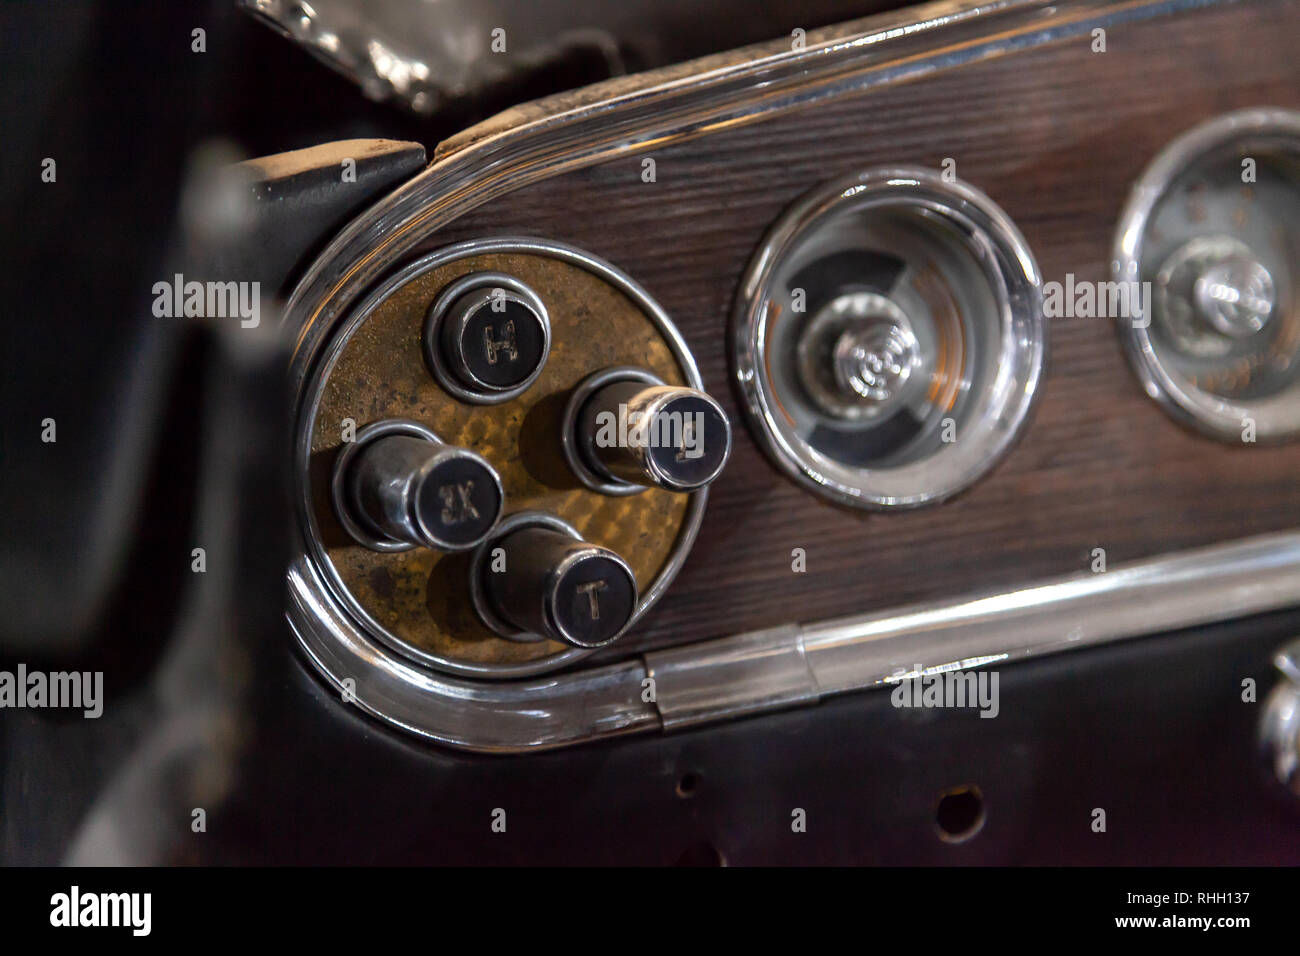 Novosibirsk, Russia - 01.30.2019: Instruments and a panel with control buttons for an automatic gearbox of an old Russian retro car gas 13 gull chaika Stock Photo